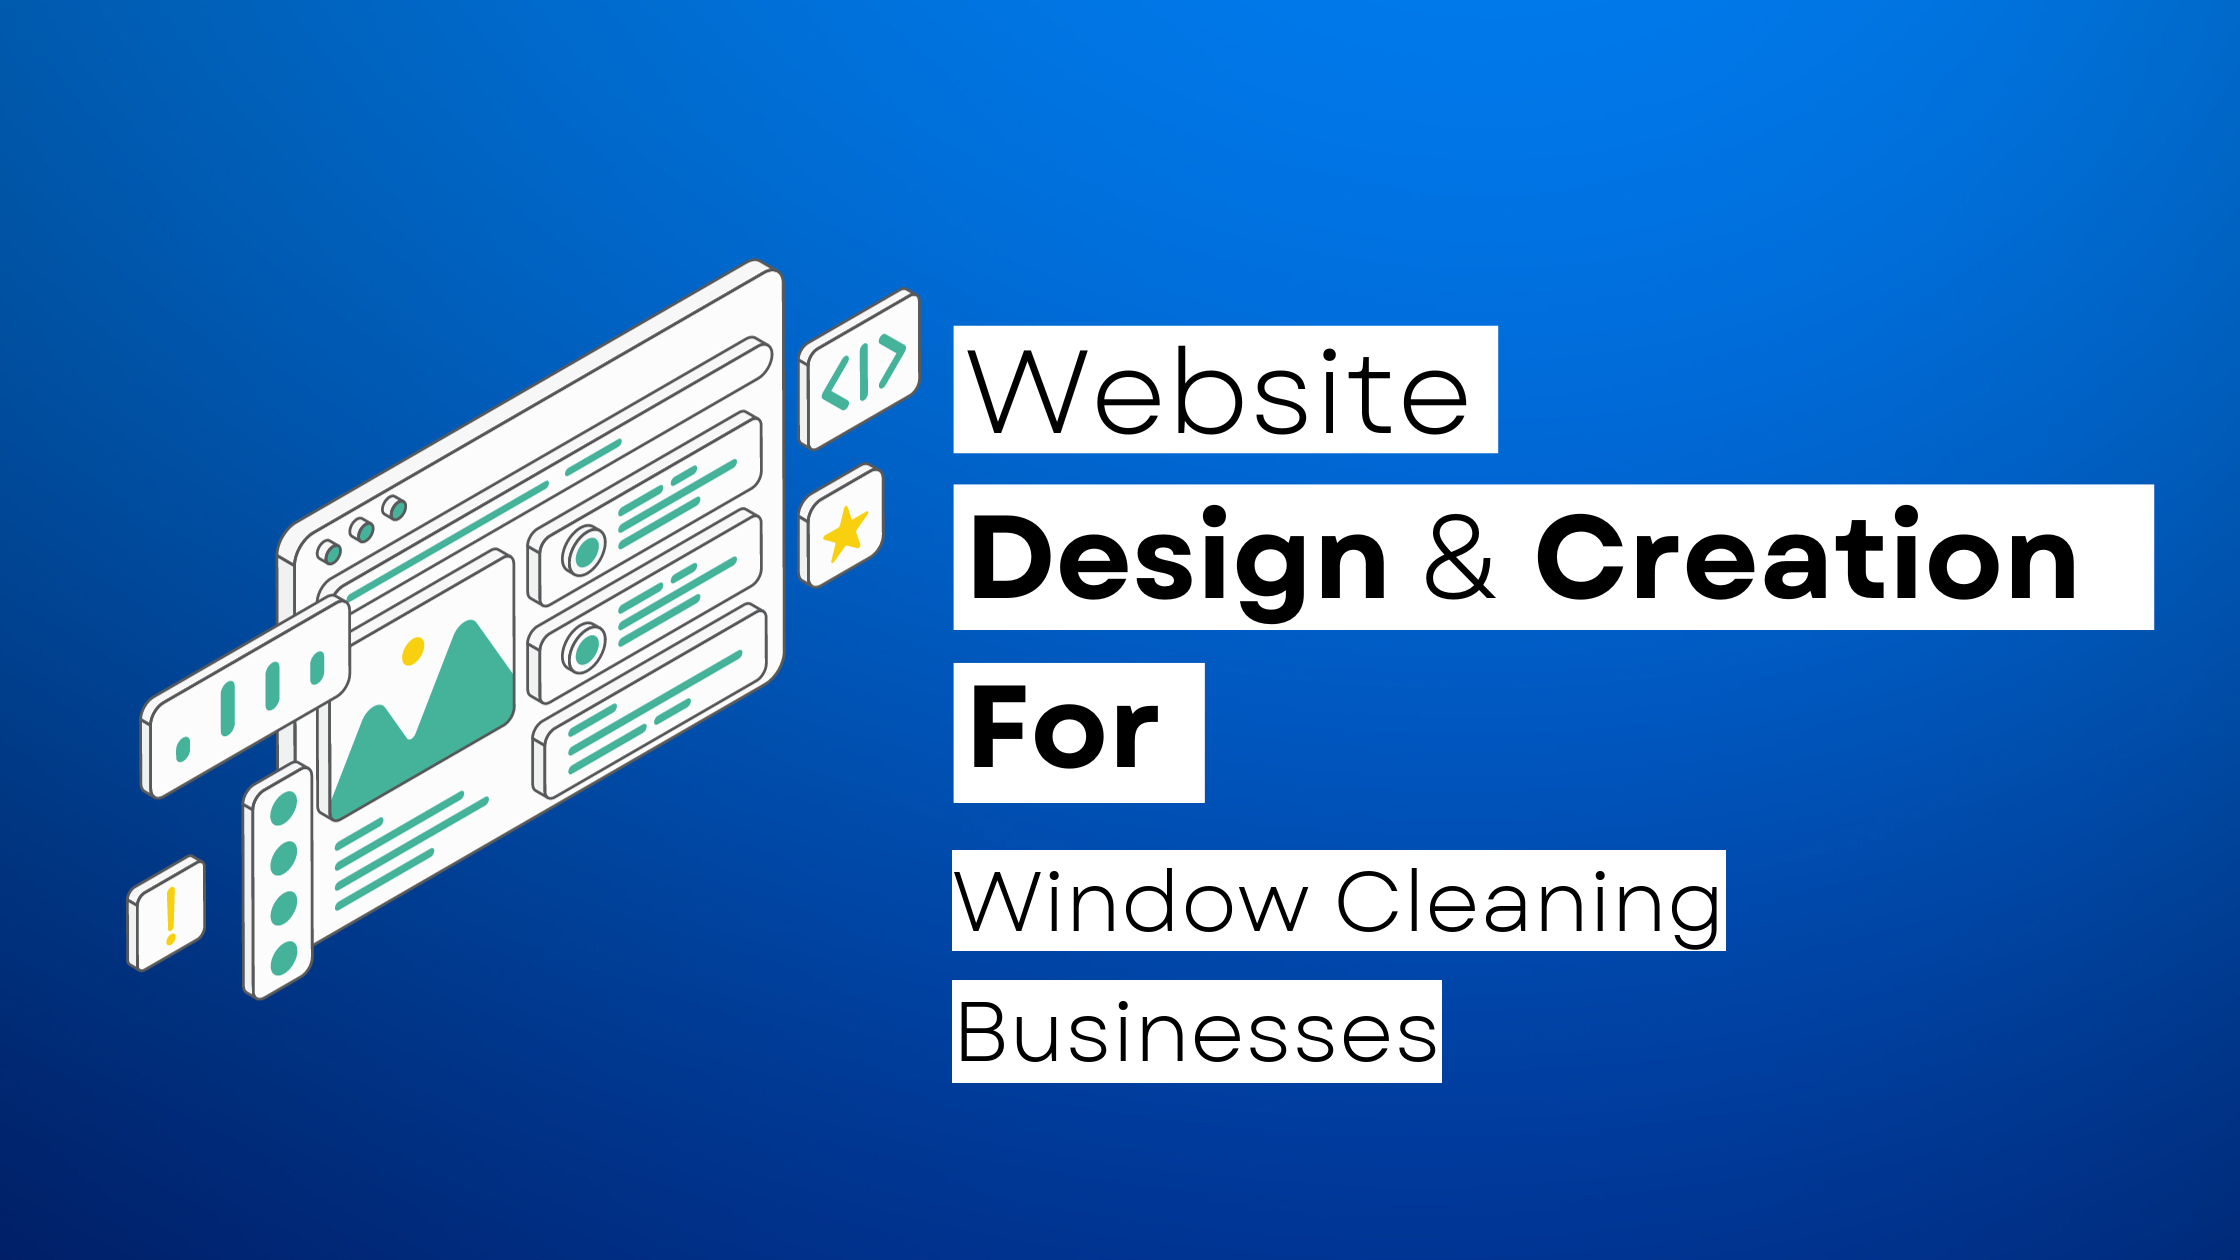 How to start a Window Cleaning website